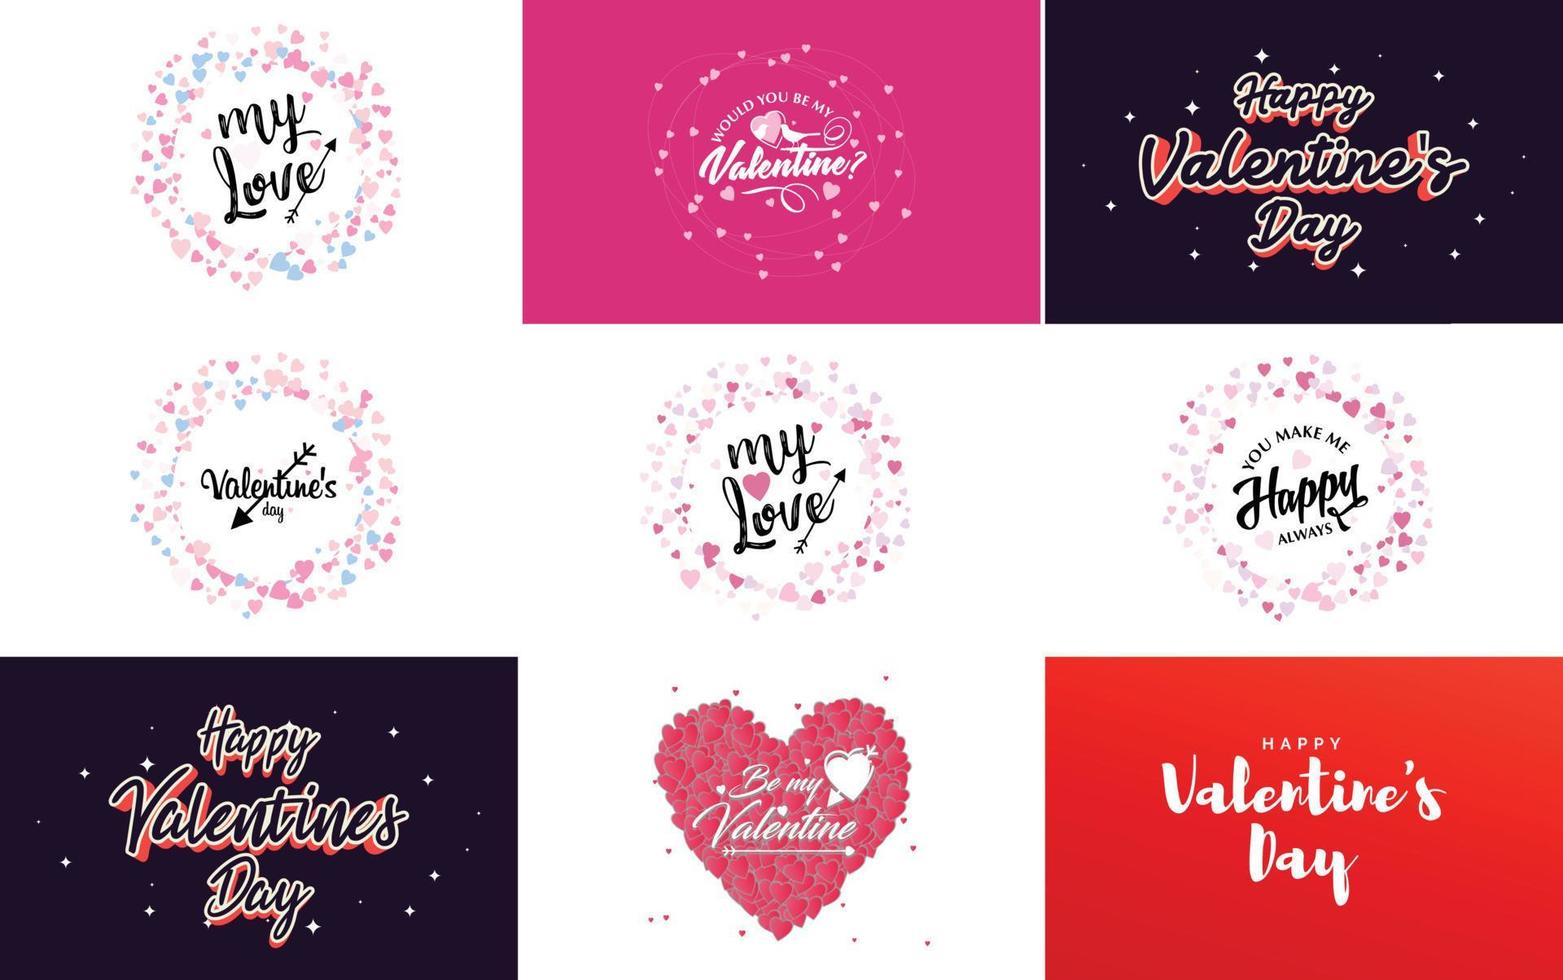 Happy Valentine's Day typography design with hearts vector